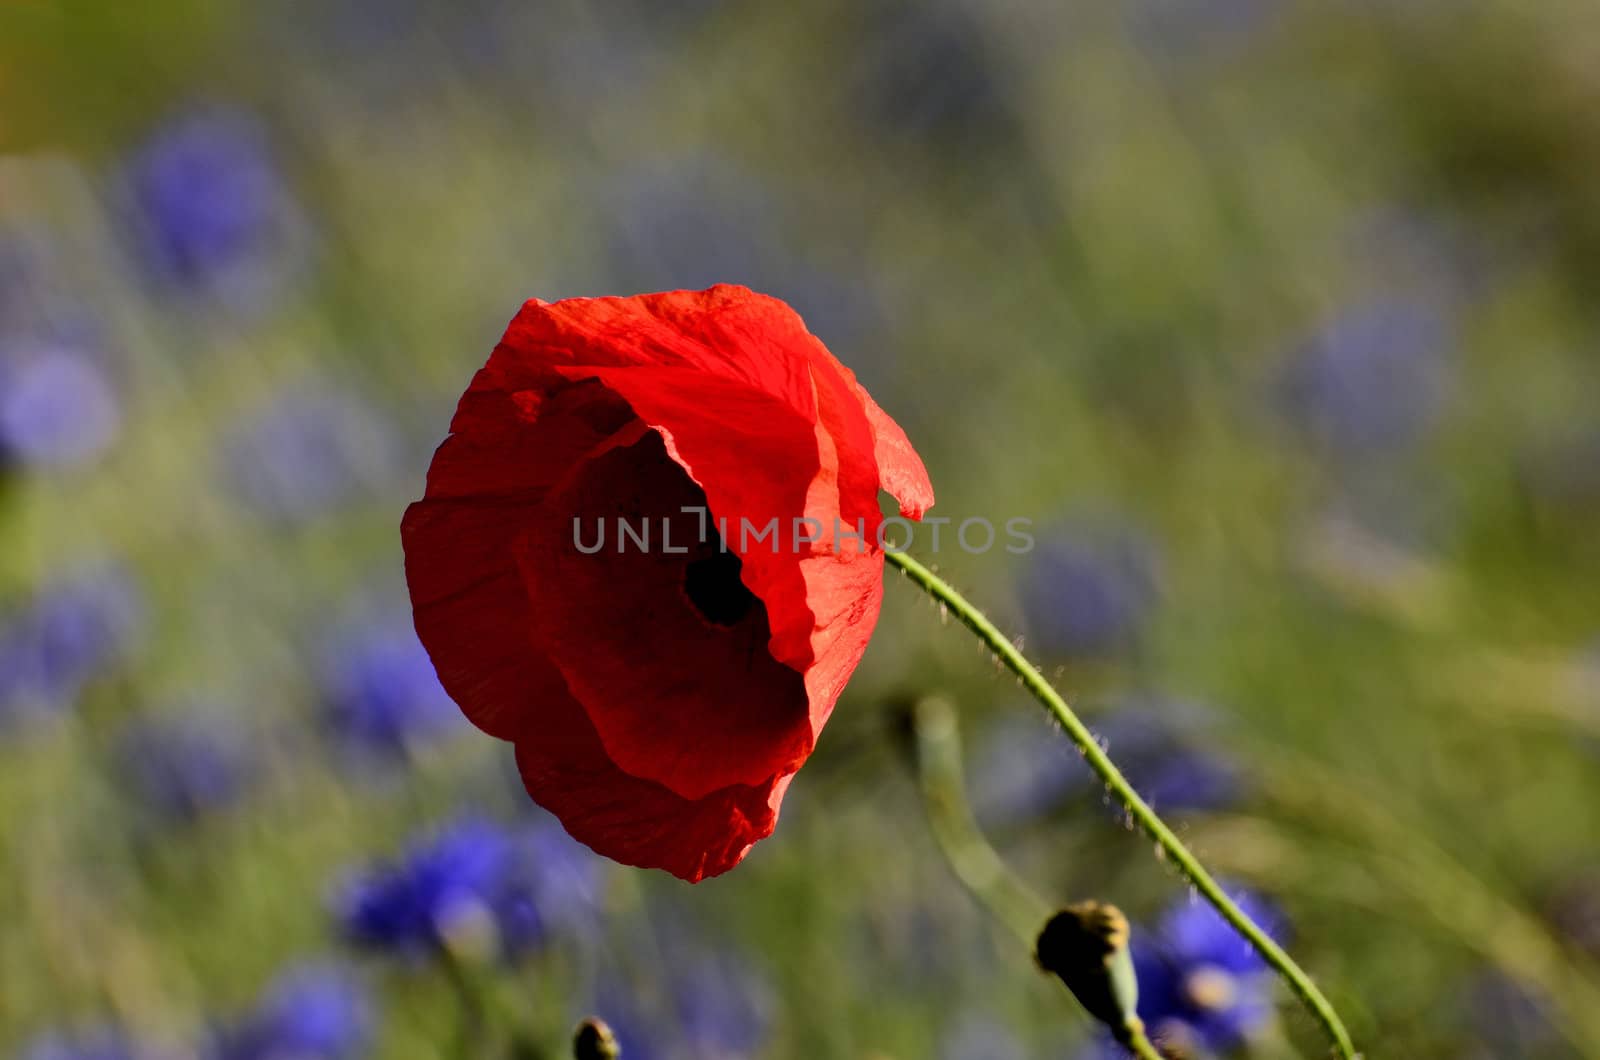 The photo shows a poppy flower on a blurred background of field of grain with cornflowers.